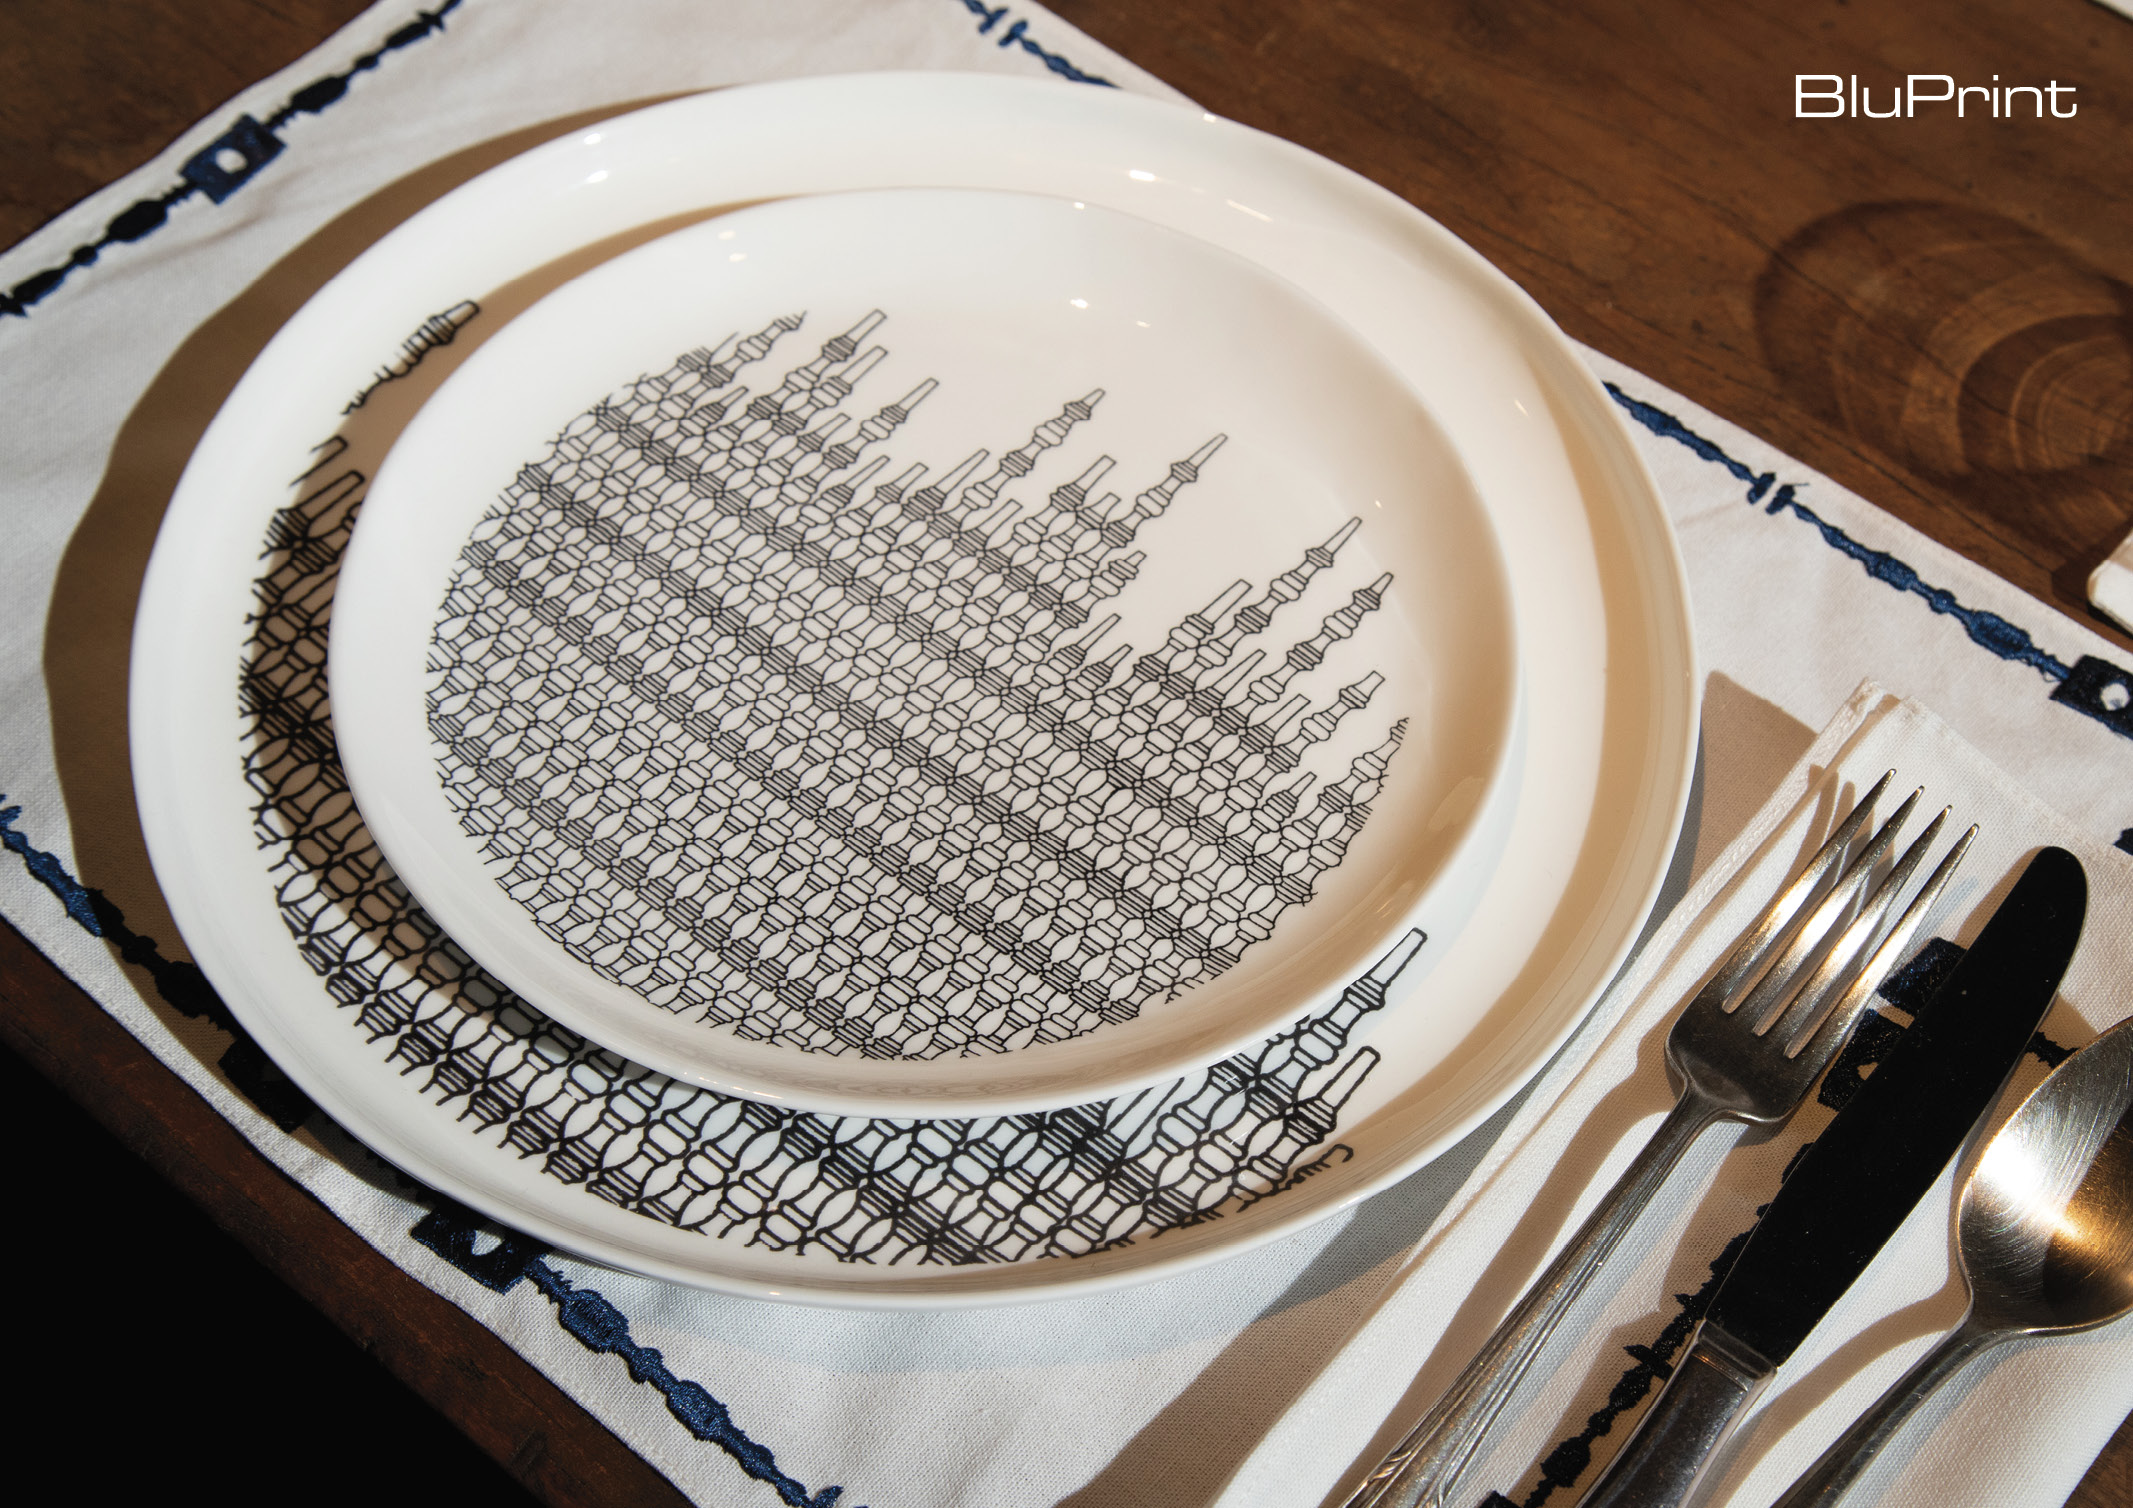 charger and plate featuring Filipino motif by Ito Kish